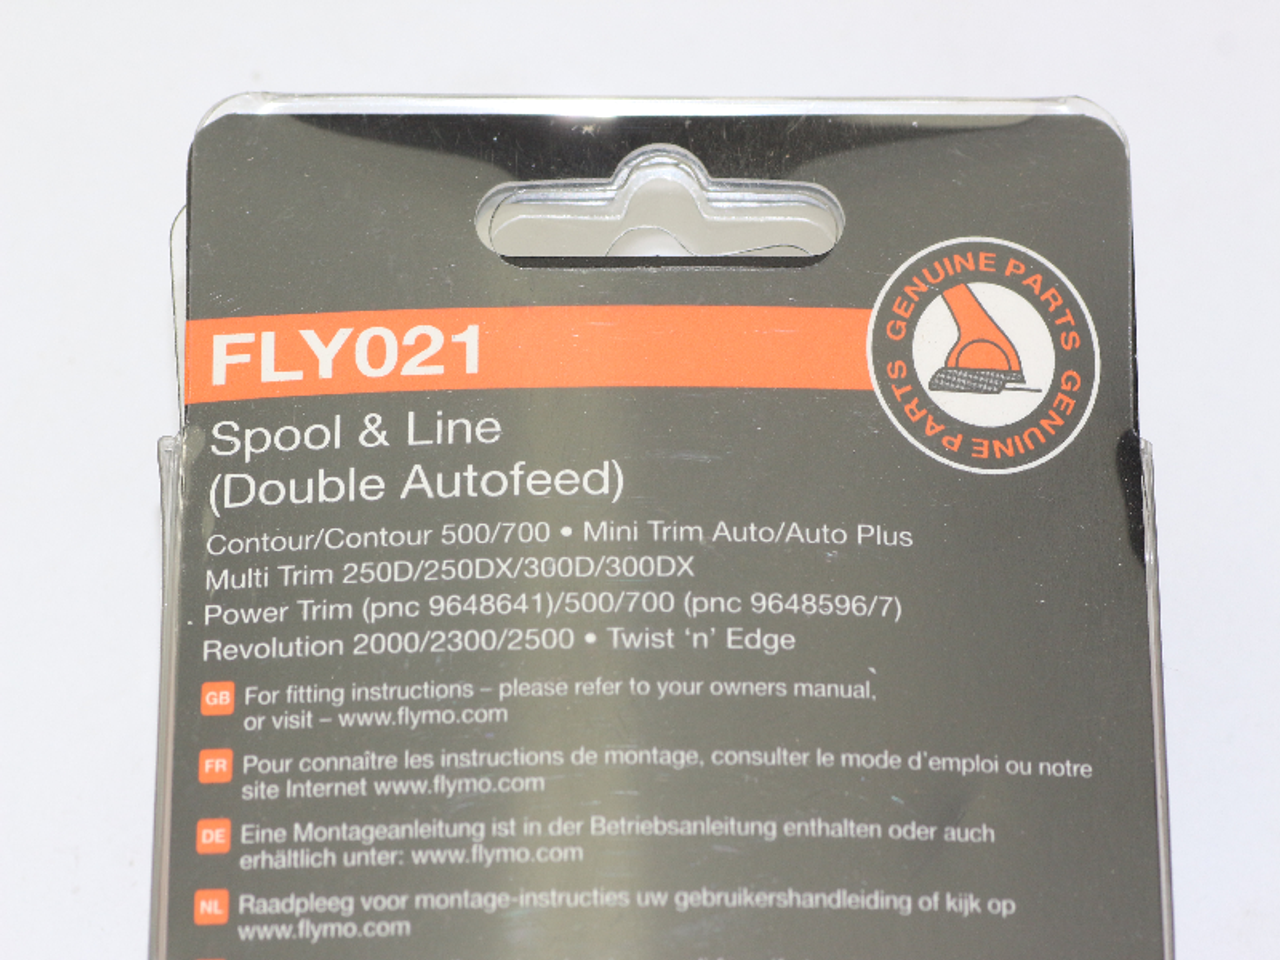 FLY021 Genuine Flymo Double Autofeed Spool and Line For Strimmer & Trimmer - buymystuff.co.uk